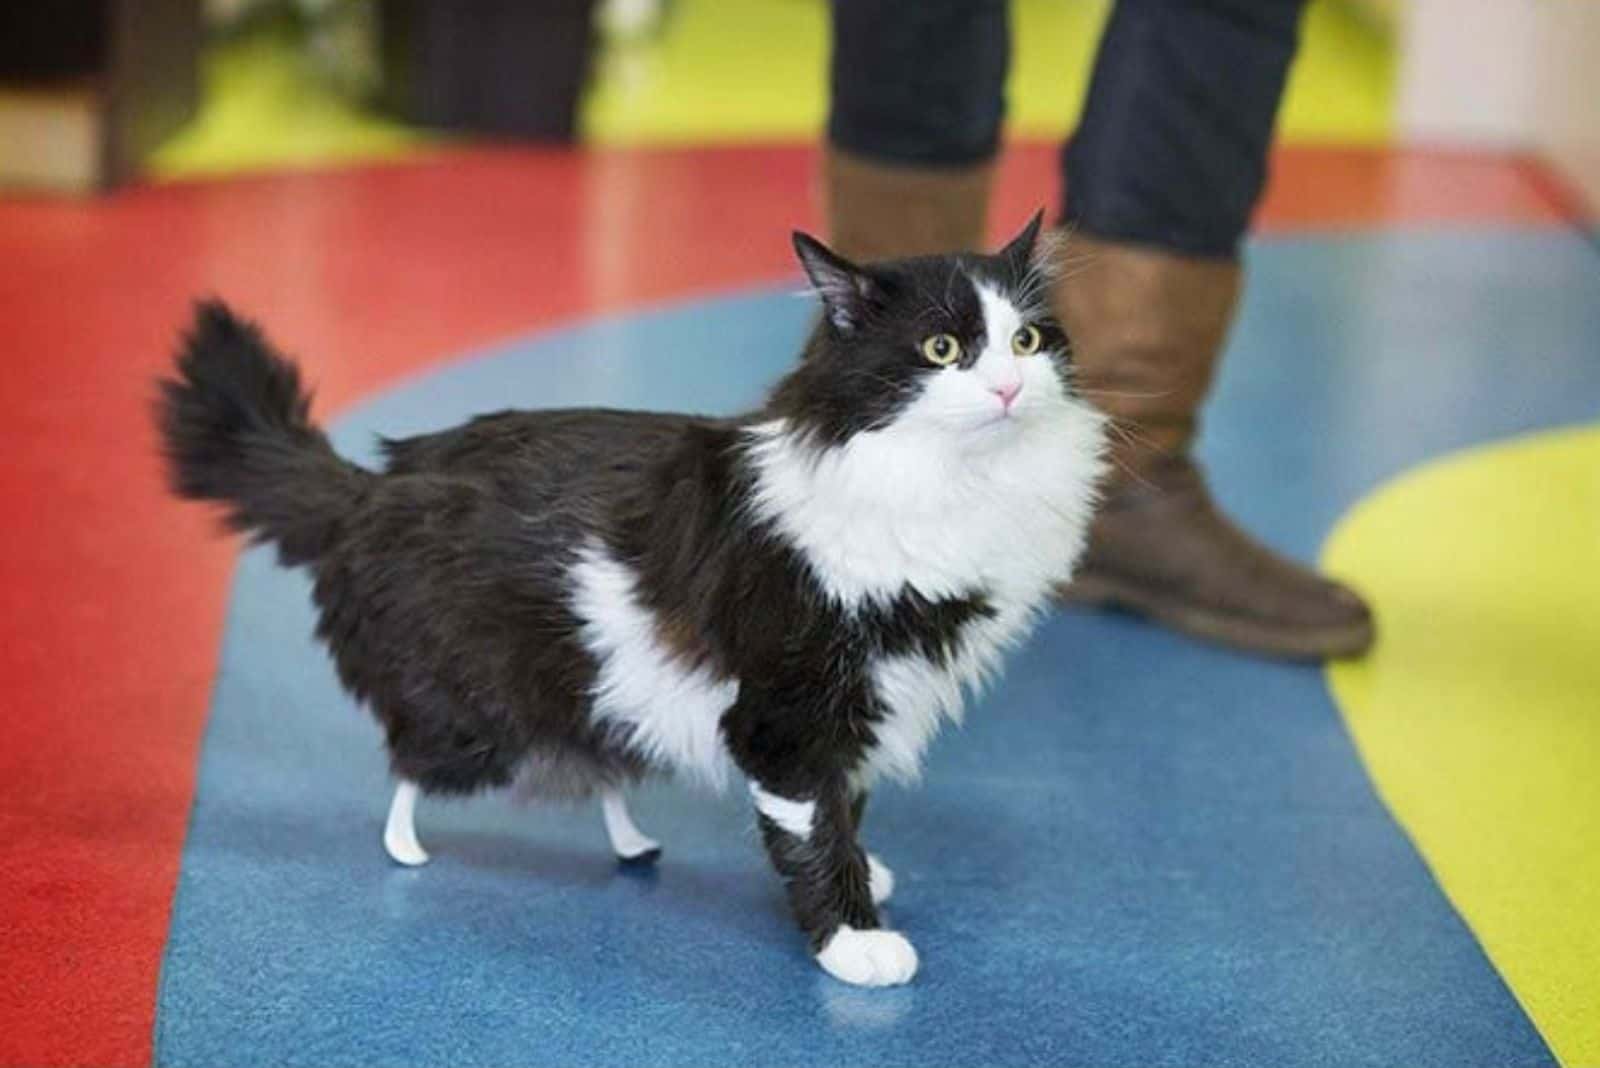 a rescued cat with helper paws walks next to its owner